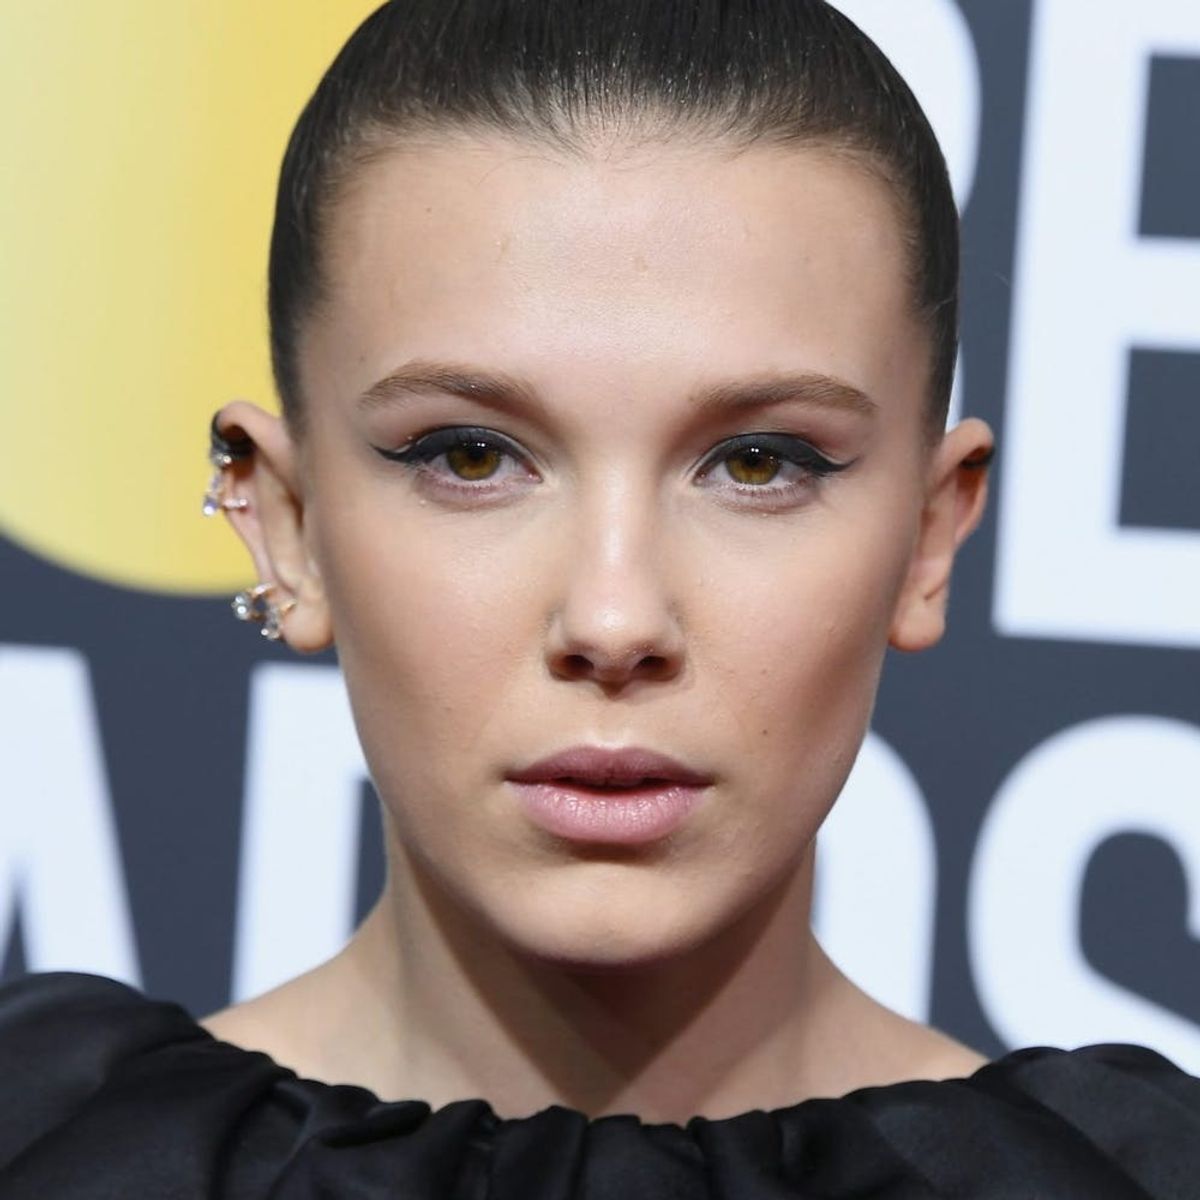 THIS Is What Millie Bobby Brown Wore on Her Lips to Keep Them Rosy on the Red Carpet